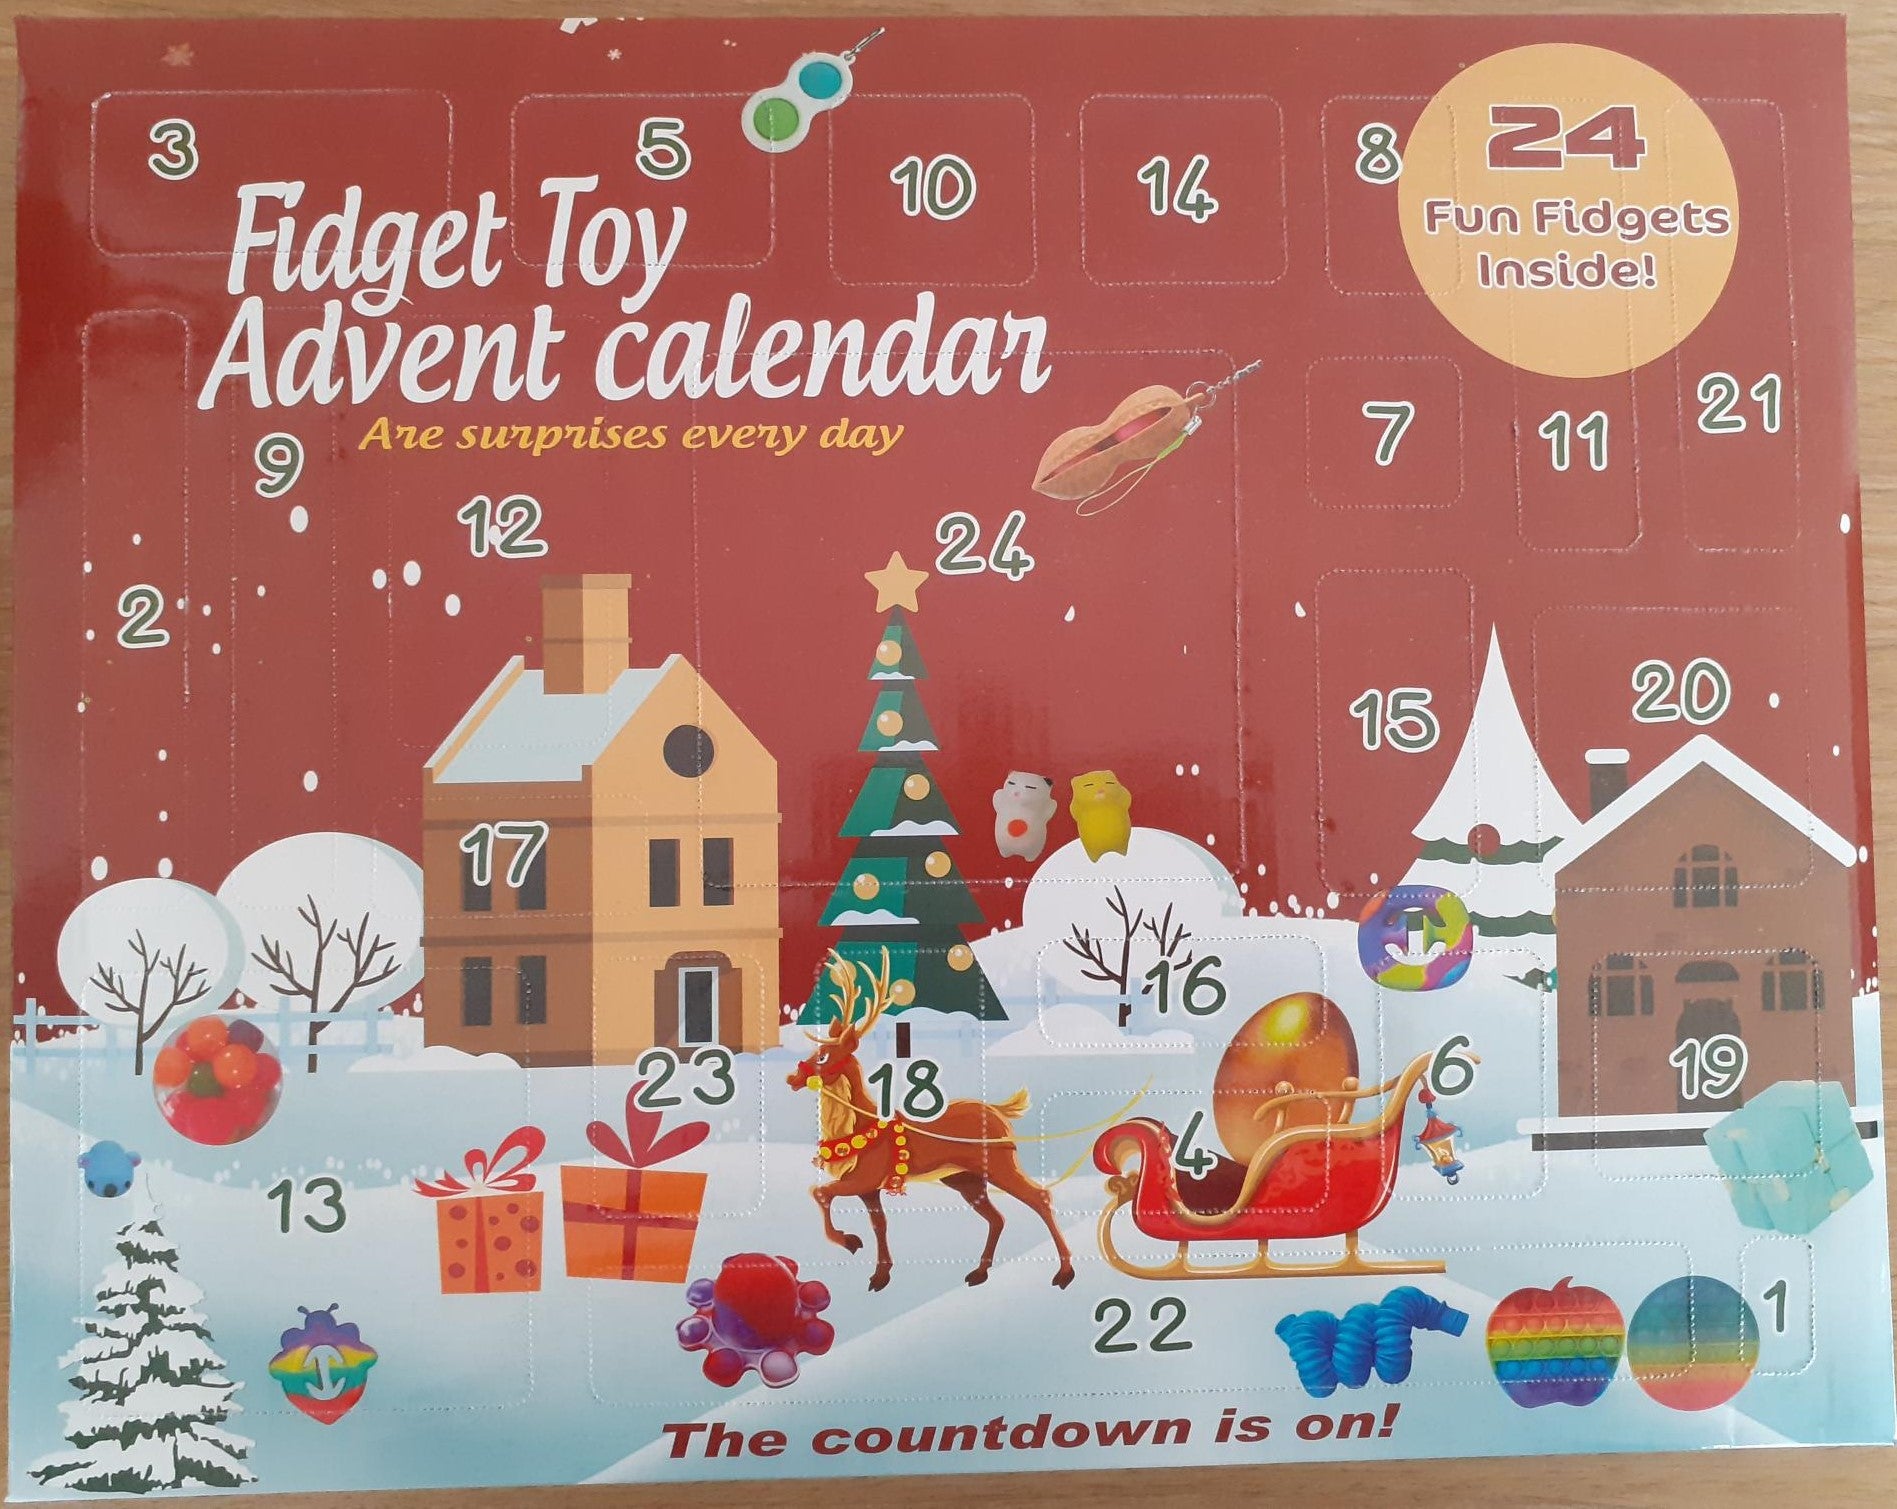 The advent calendar is targeted at children and has been on sale in Scotland